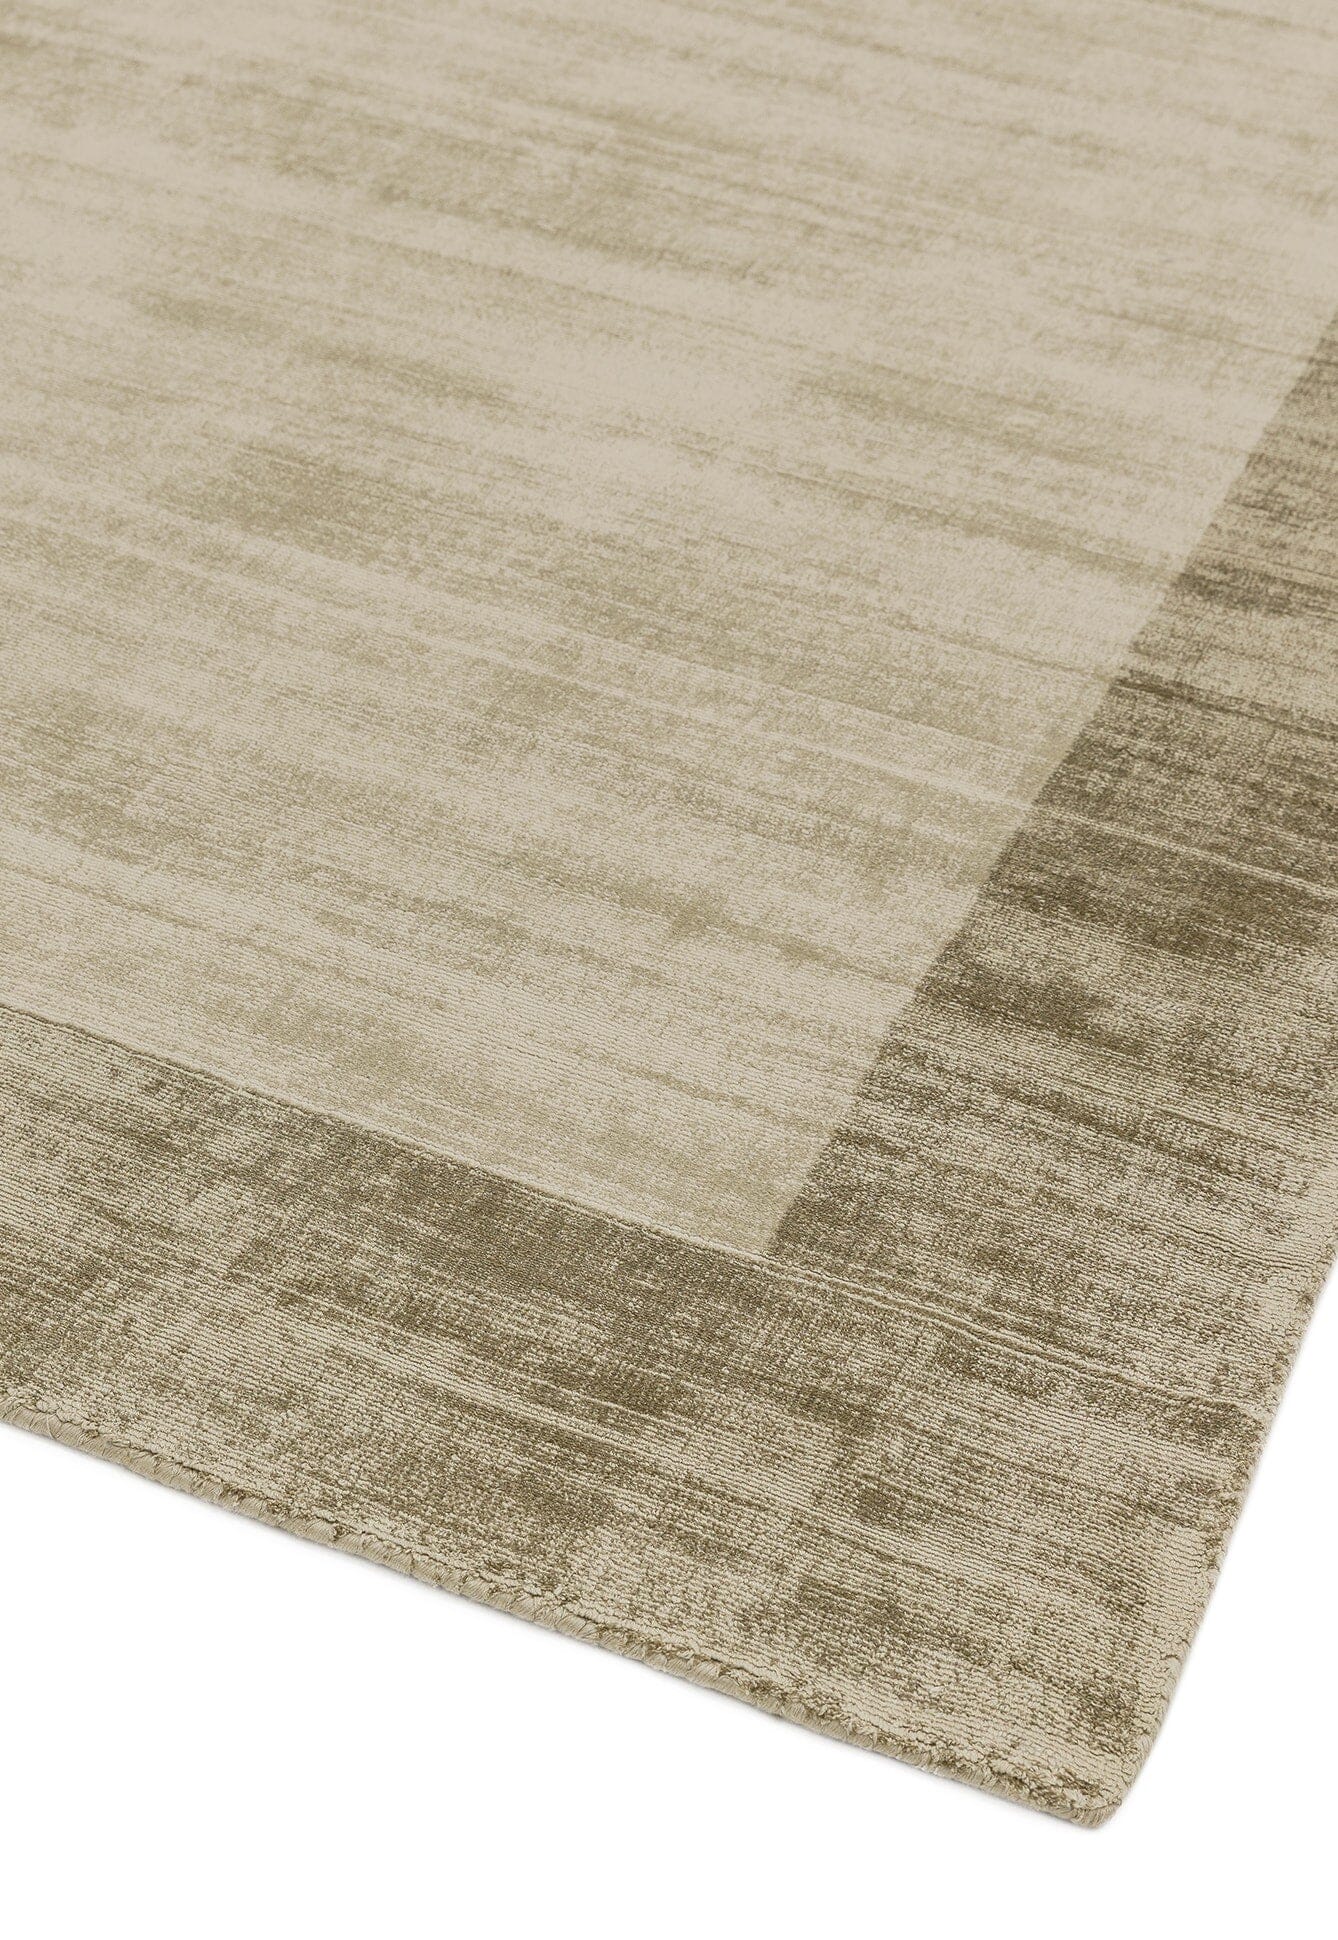  Asiatic Carpets-Asiatic Carpets Blade Hand Woven Rug Smoke Putty - 200 x 200cm-Grey, Silver 805 